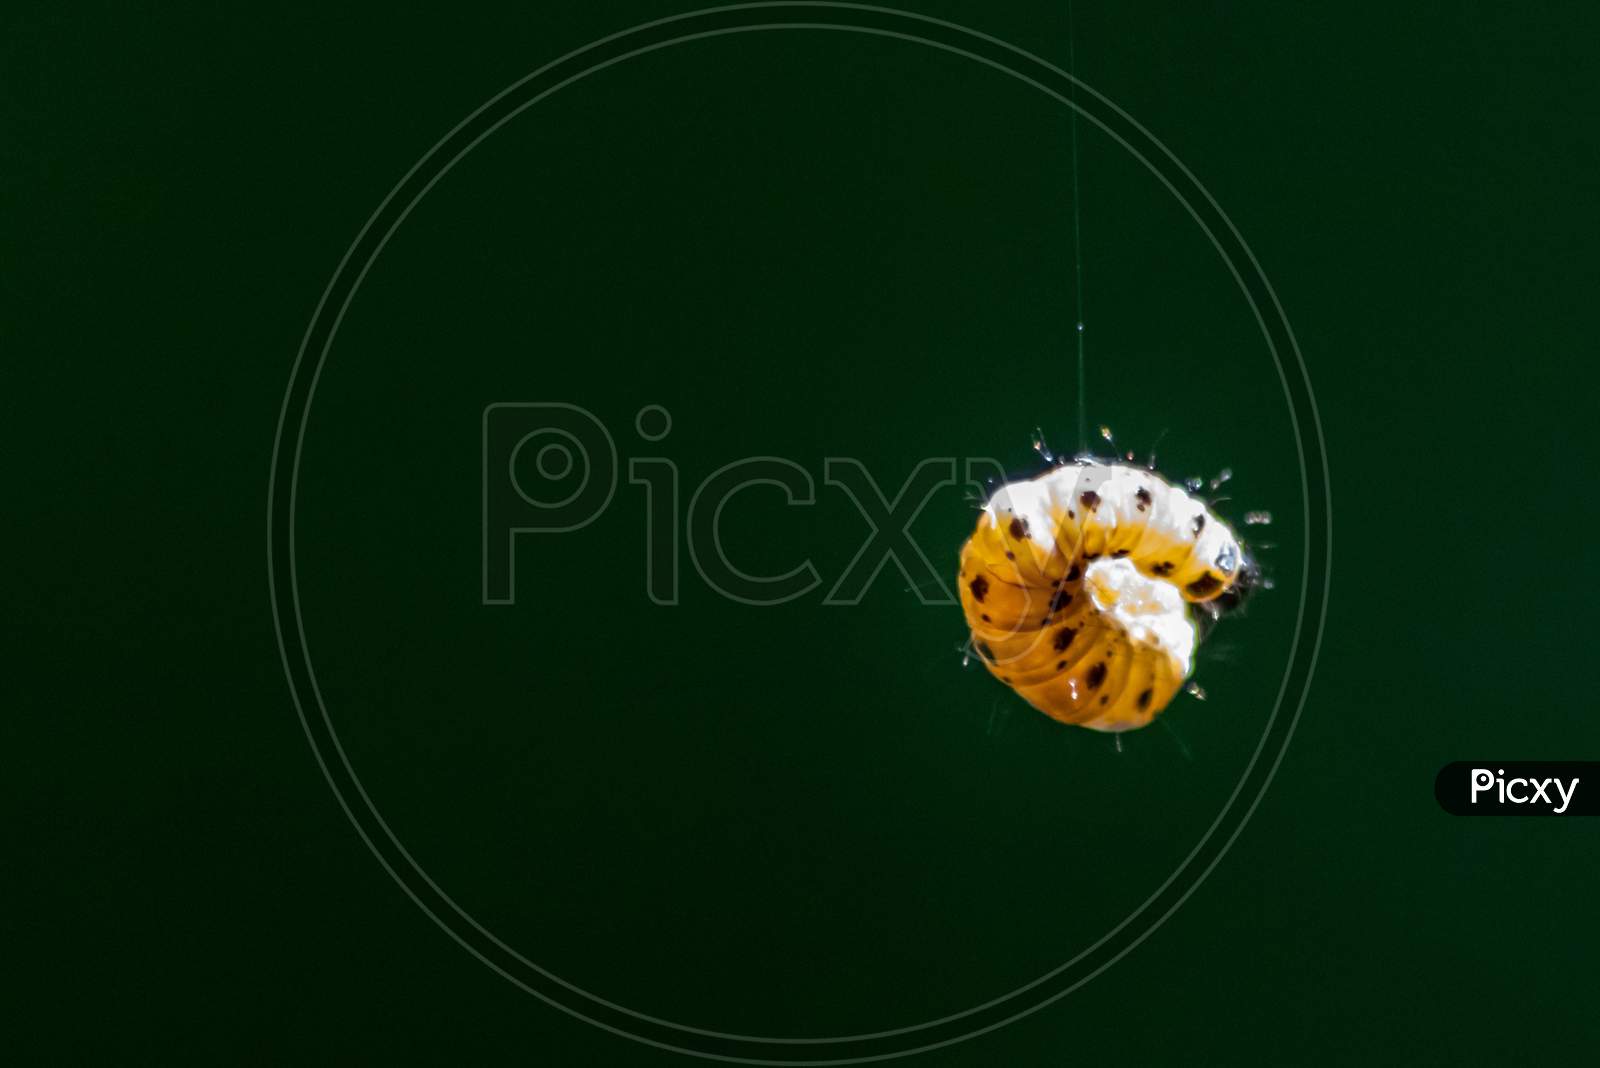 Little caterpillar hanging in the air on a silky line with natural blurred background uses silk cobwebs to climb on trees in yellow with black dots as next generation butterfly after metamorphosis